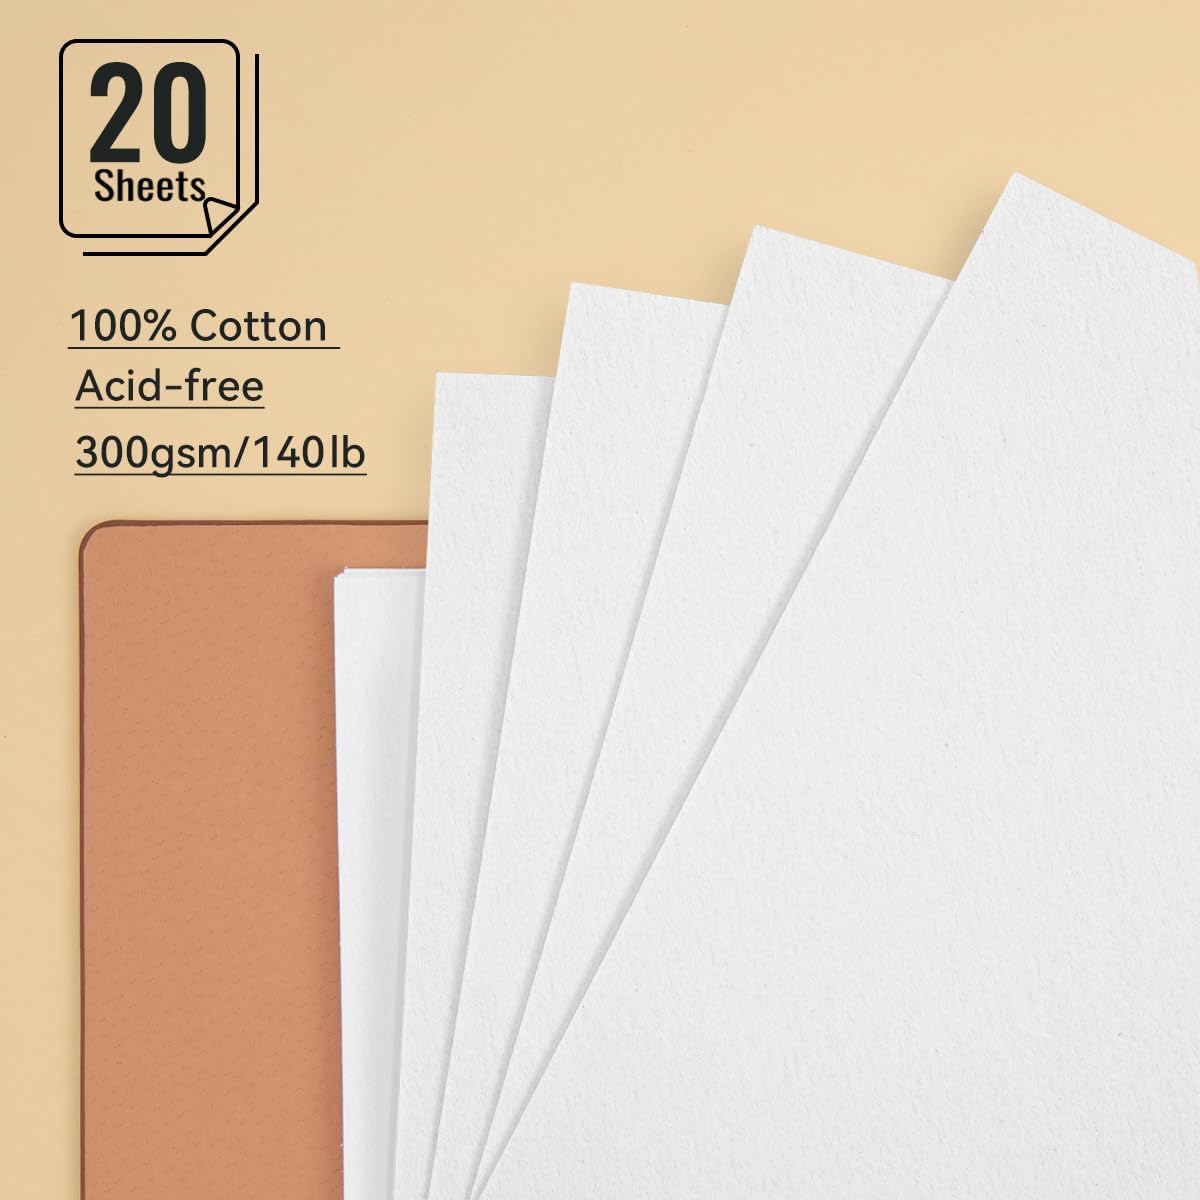 Lightwish 100% Cotton Acid Free Watercolor Journal/Sketchbook,300gsm/140lb, Hot Press Watercolor Paper,20 Sheets,9.25 * 6.3 Inches